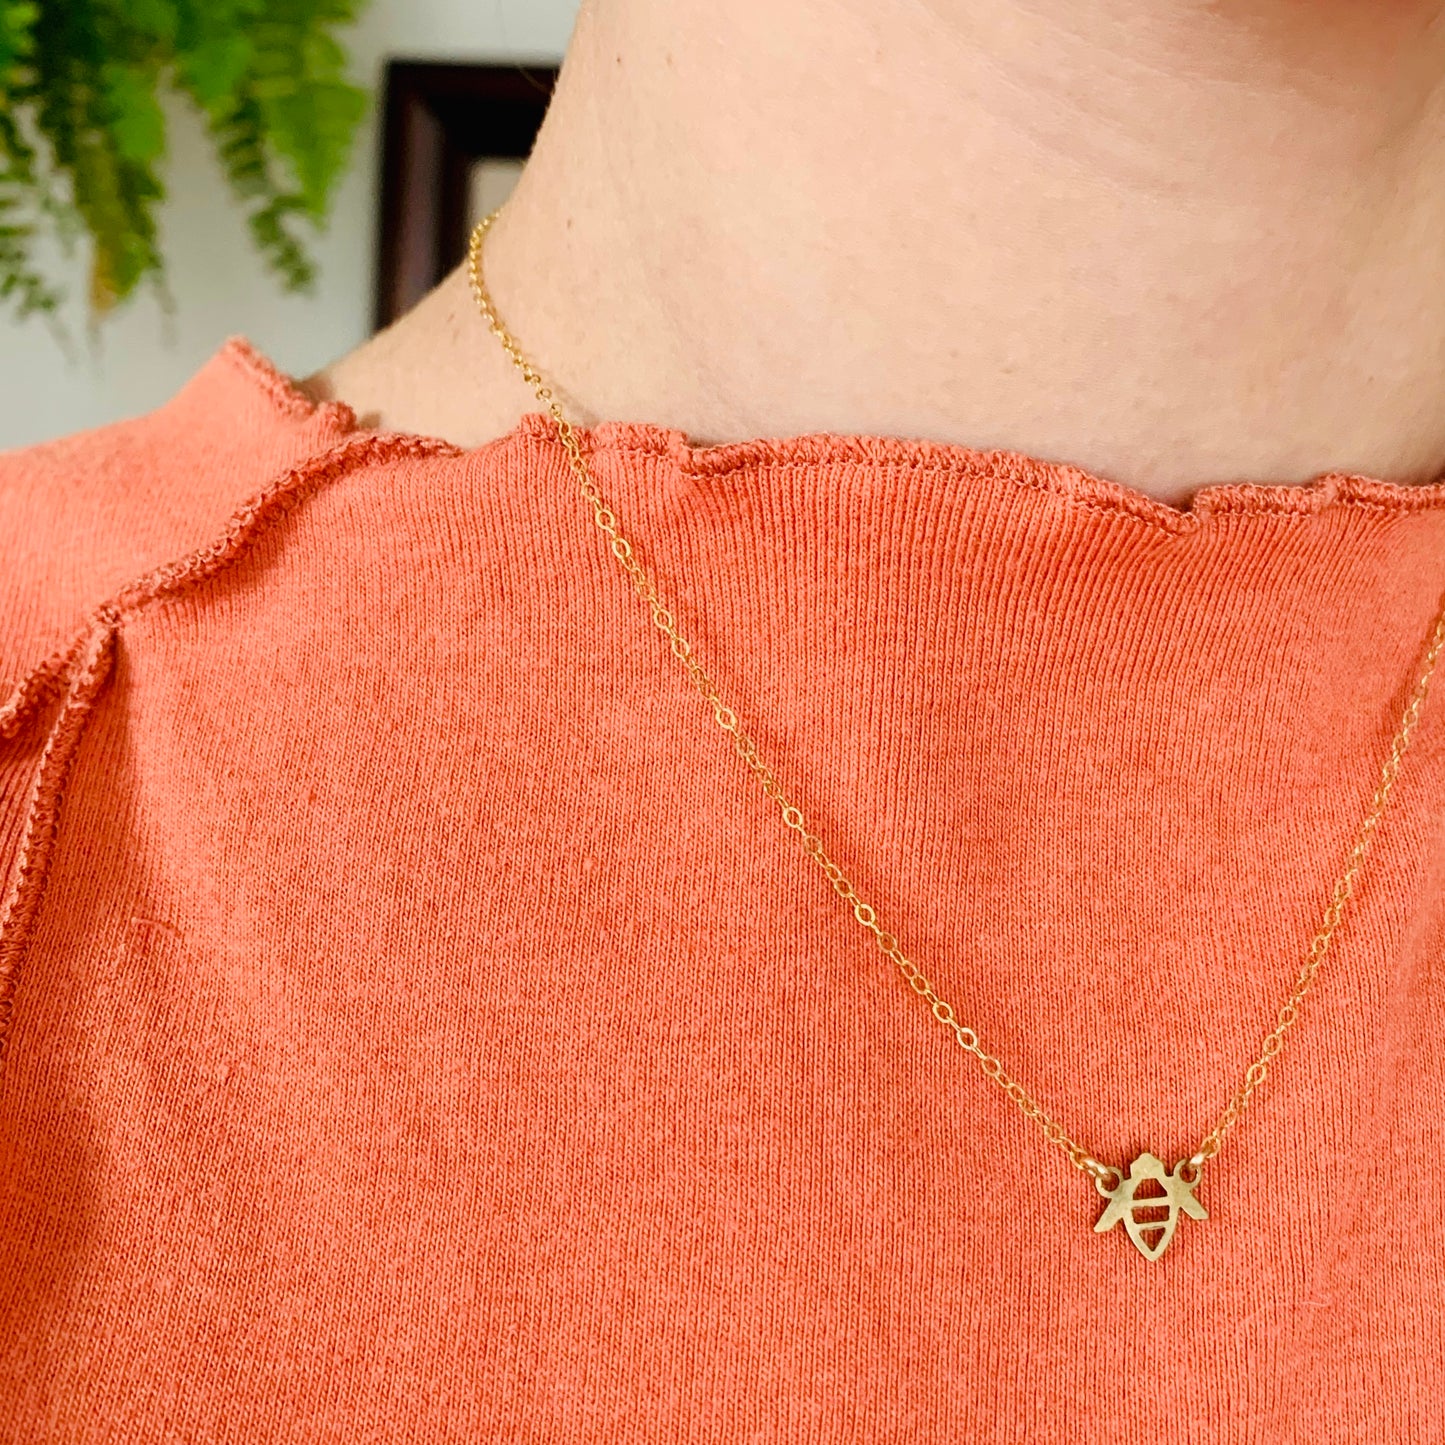 The Vintage Bee Necklace